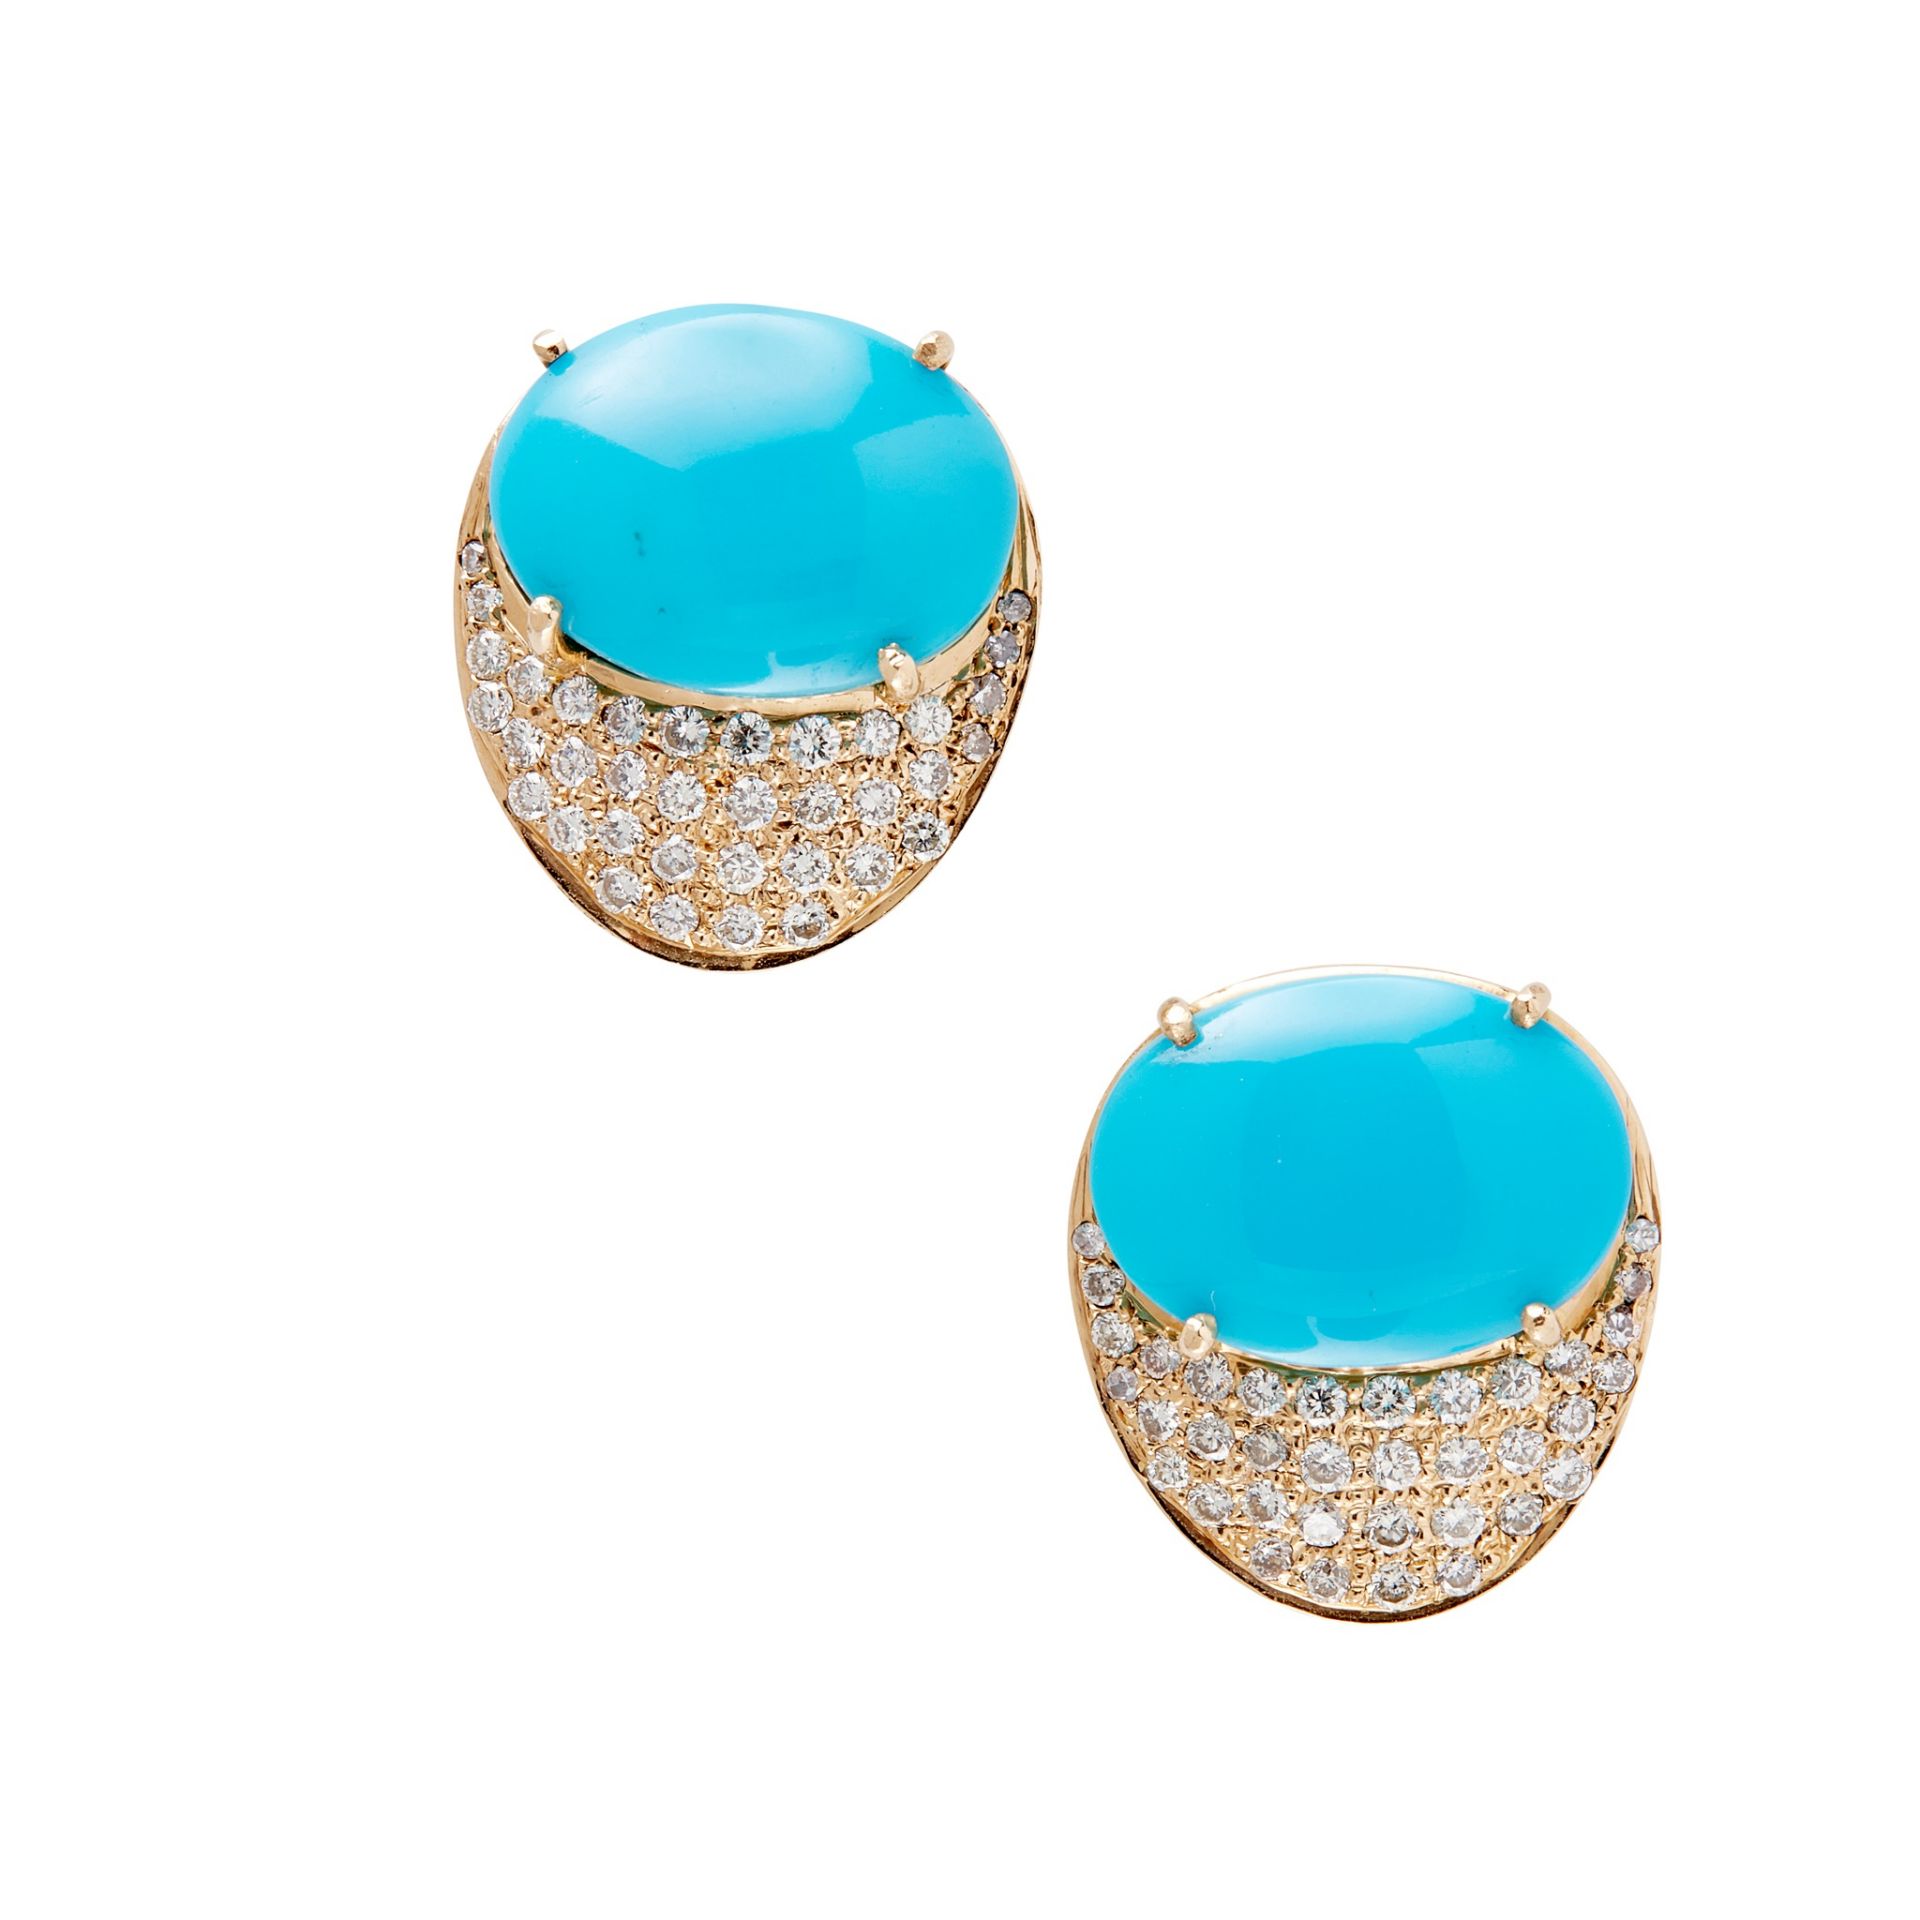 A pair of turquoise and diamond set earrings